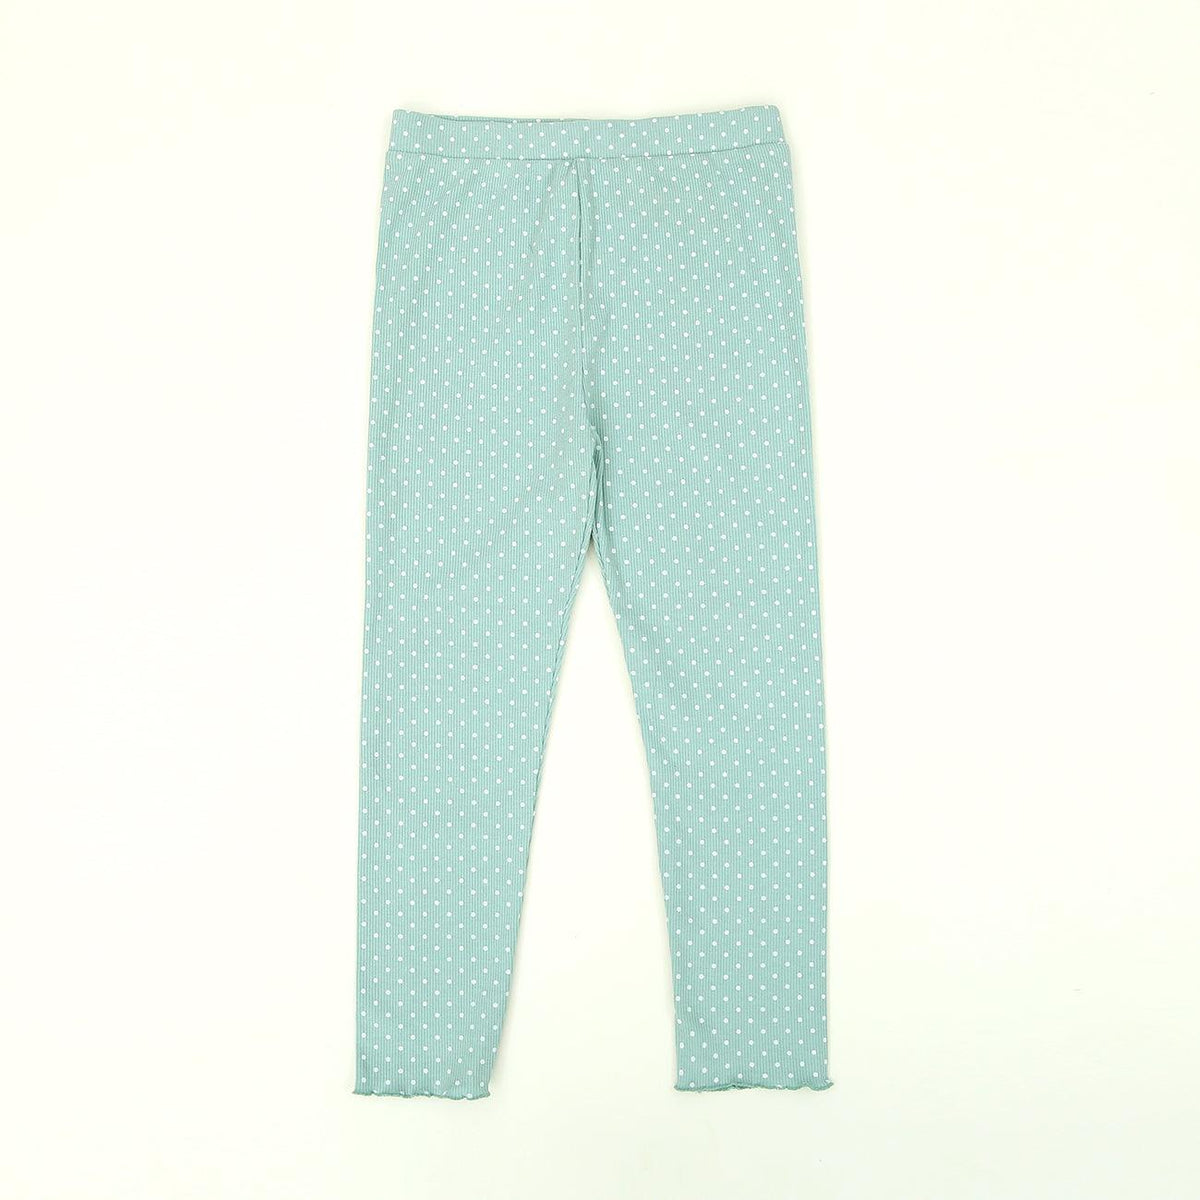 Imported All-Over Printed Soft Cotton Rib Legging For Girls 1.5-2 YRS - 5-6 YRS (LE-11565) - Brands River